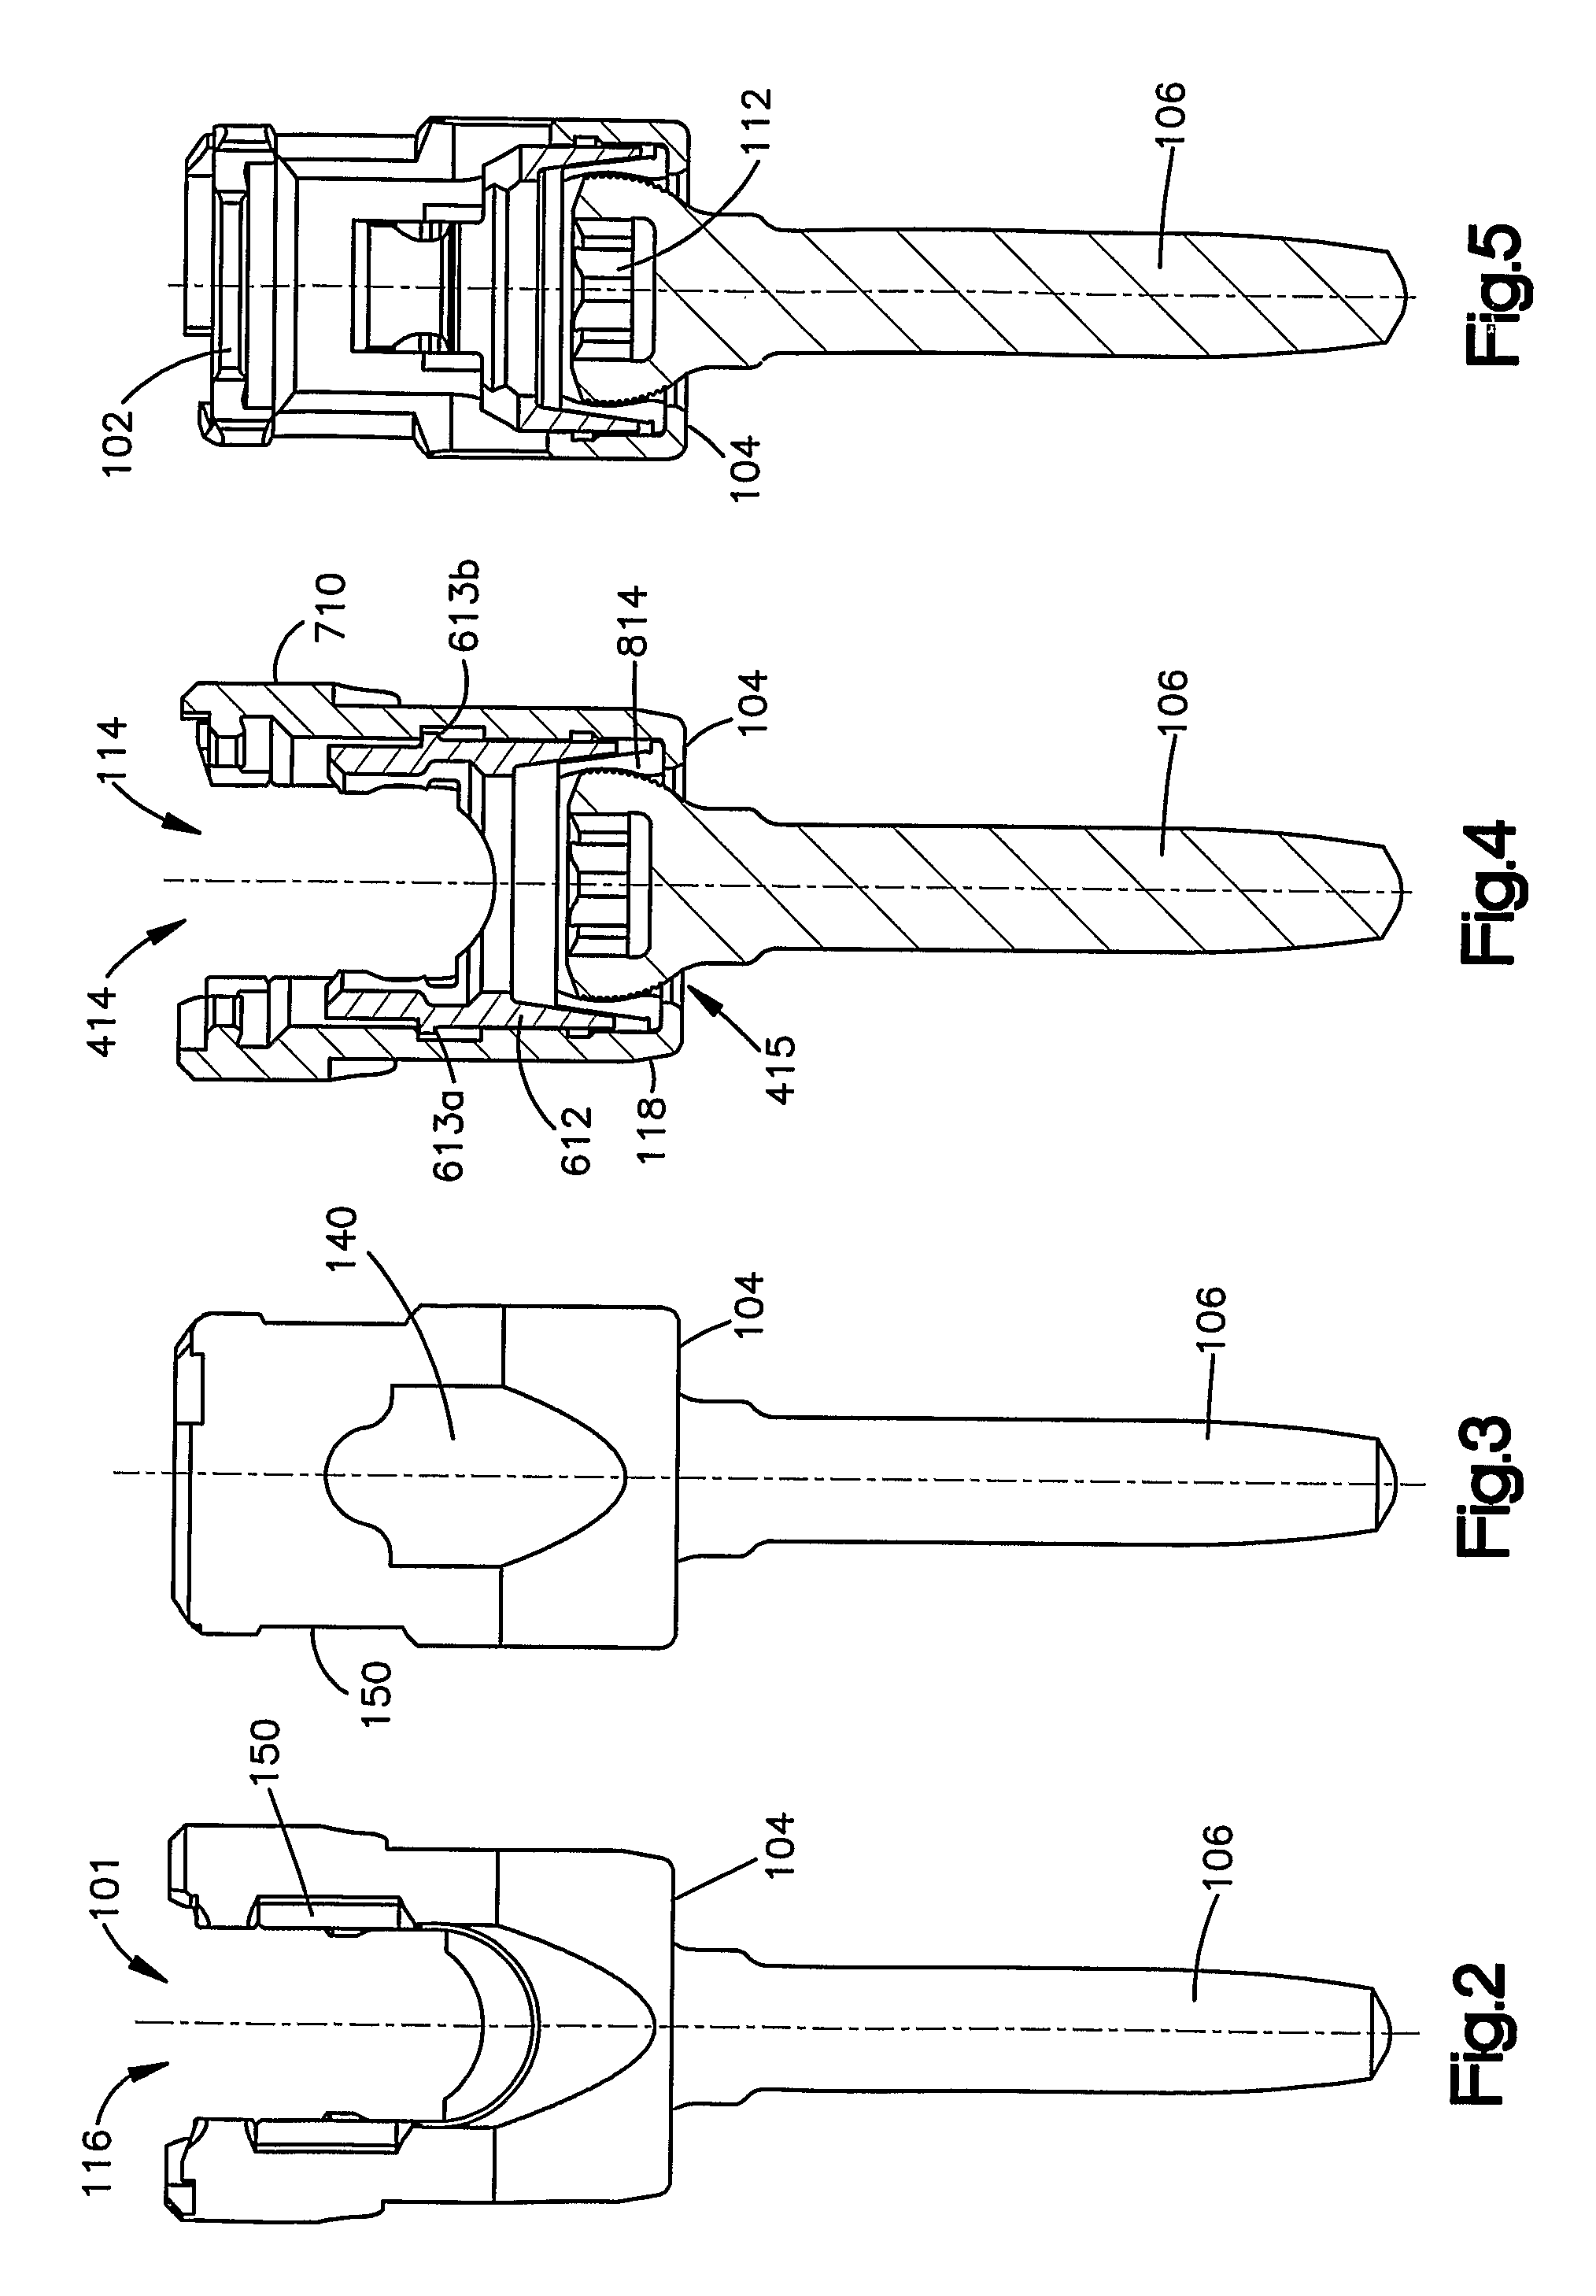 Bone Anchor With Locking Cap and Method of Spinal Fixation